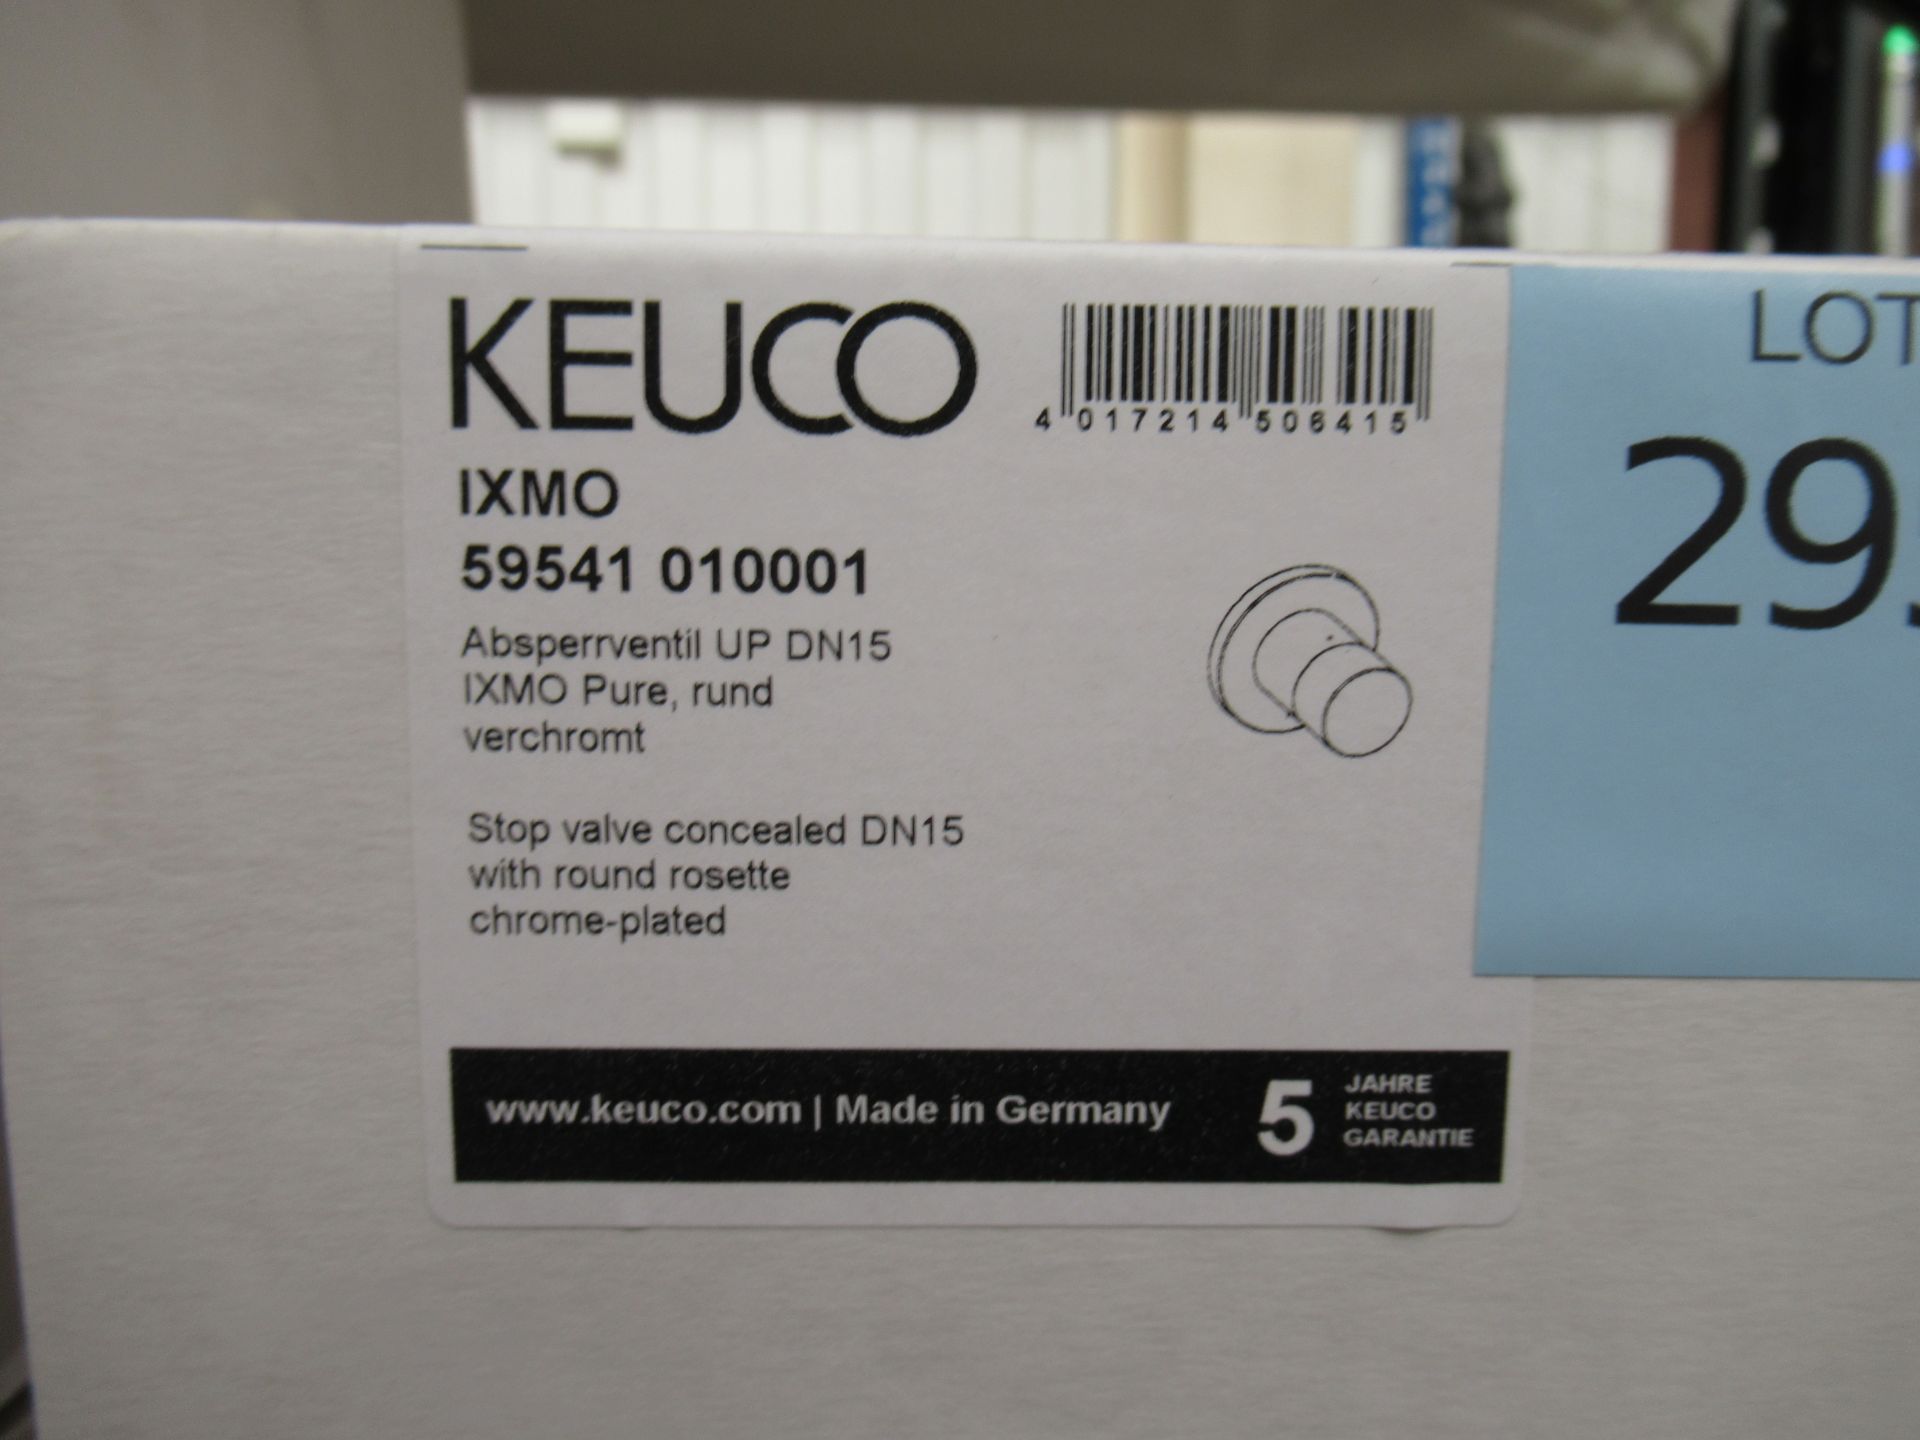 2 x Keuco IXMO Stop Valve Concealed, Chrome Plated, P/N 59541-010001 - Image 2 of 2